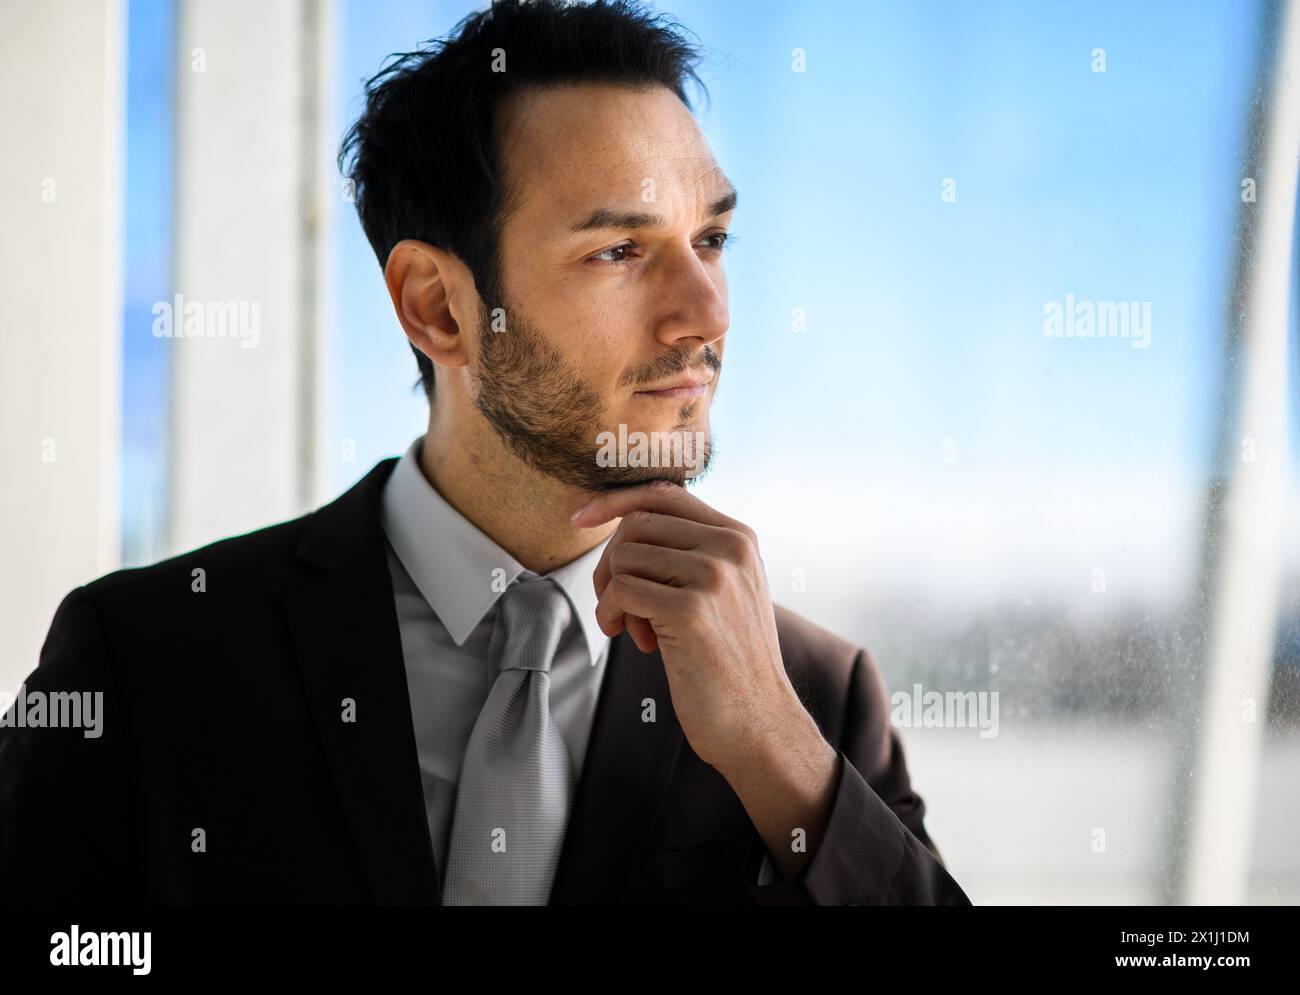 Professional male in a suit looks contemplatively out of an office window Stock Photo